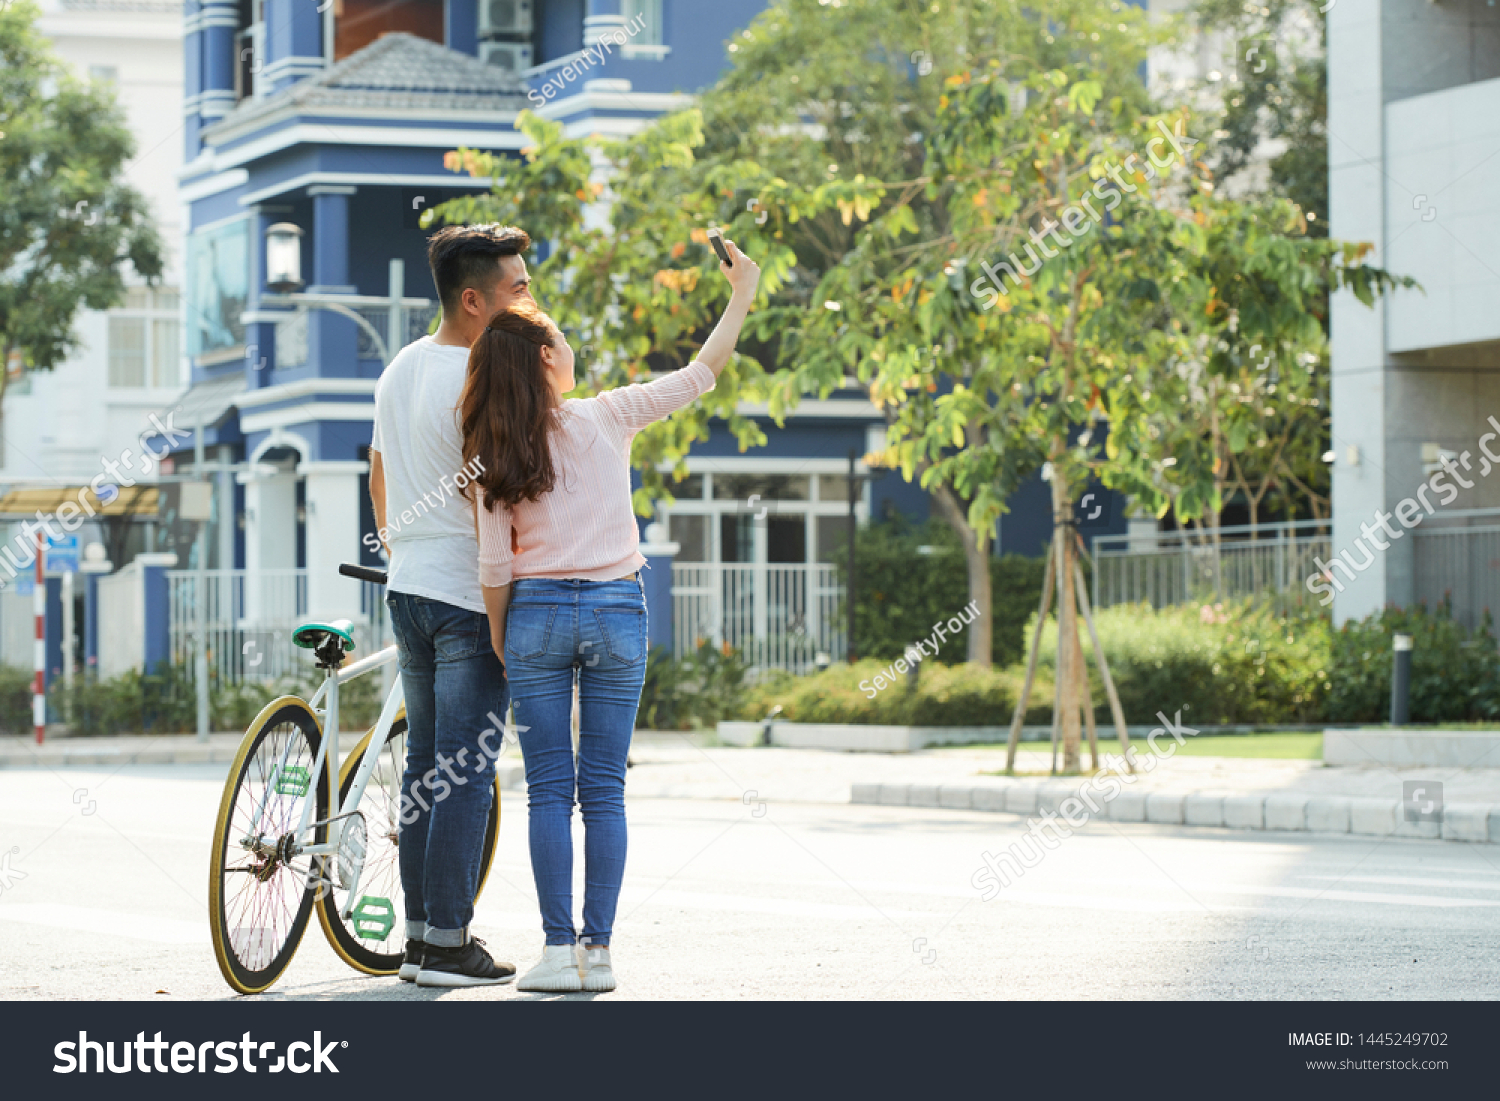 Rear view of Asian young couple standing with bicycle on the street and making selfie portrait on mobile phone #1445249702